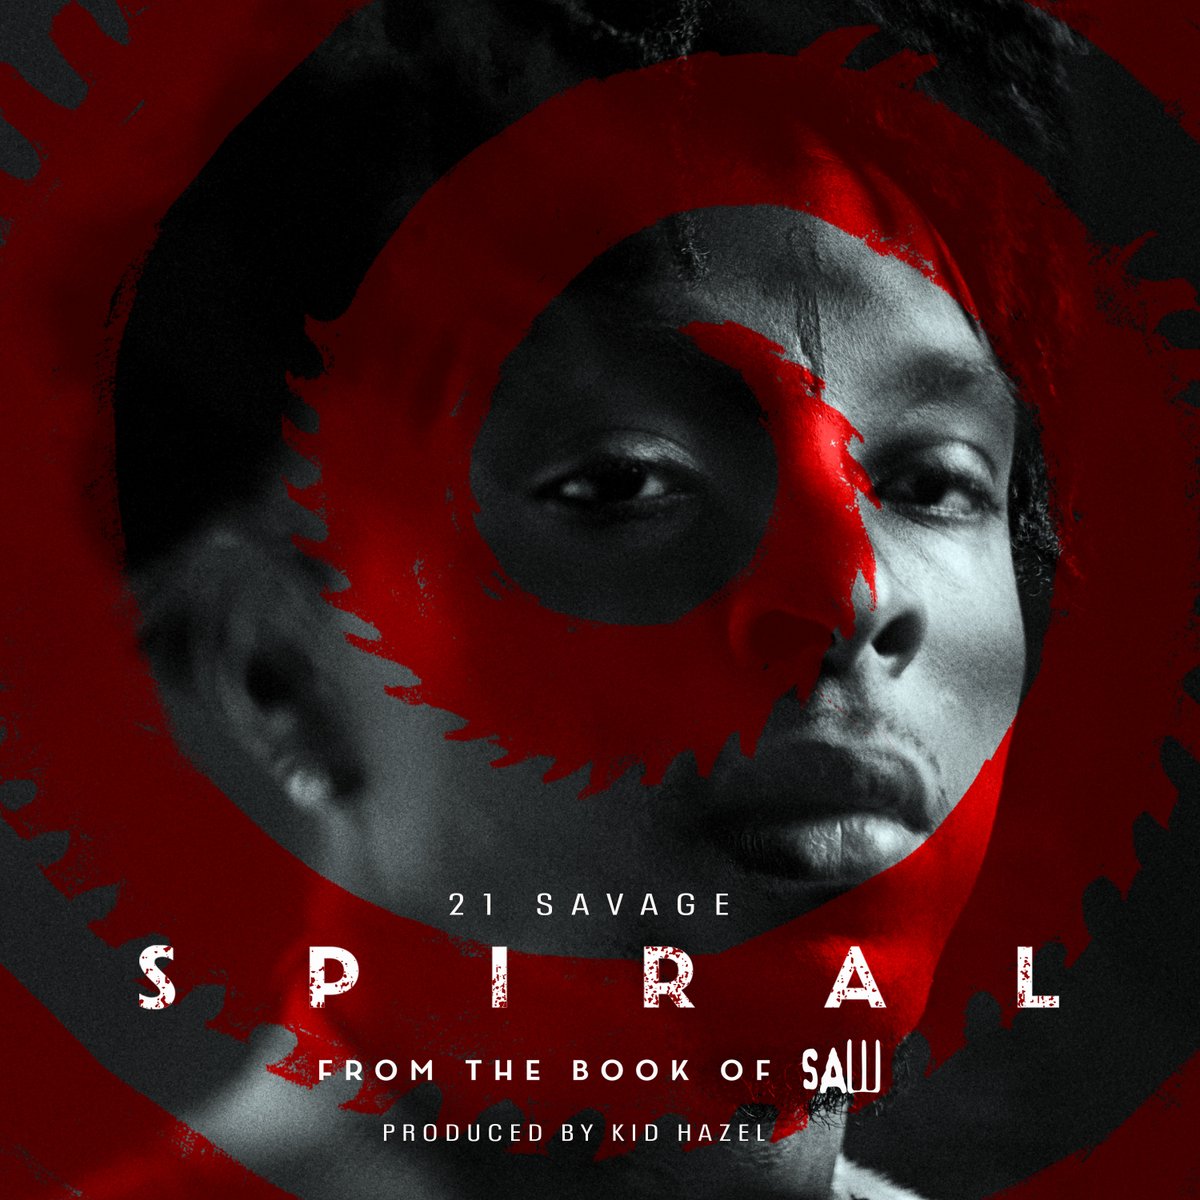 Attention horror fans - #Spiral is in theaters this Friday from @lionsgate with my score as usual, but this latest @saw has something unusual - an EP from @21Savage due out Friday on @epicrecords - his team including @megameezy and @sgkidhazel killed it on these tracks!